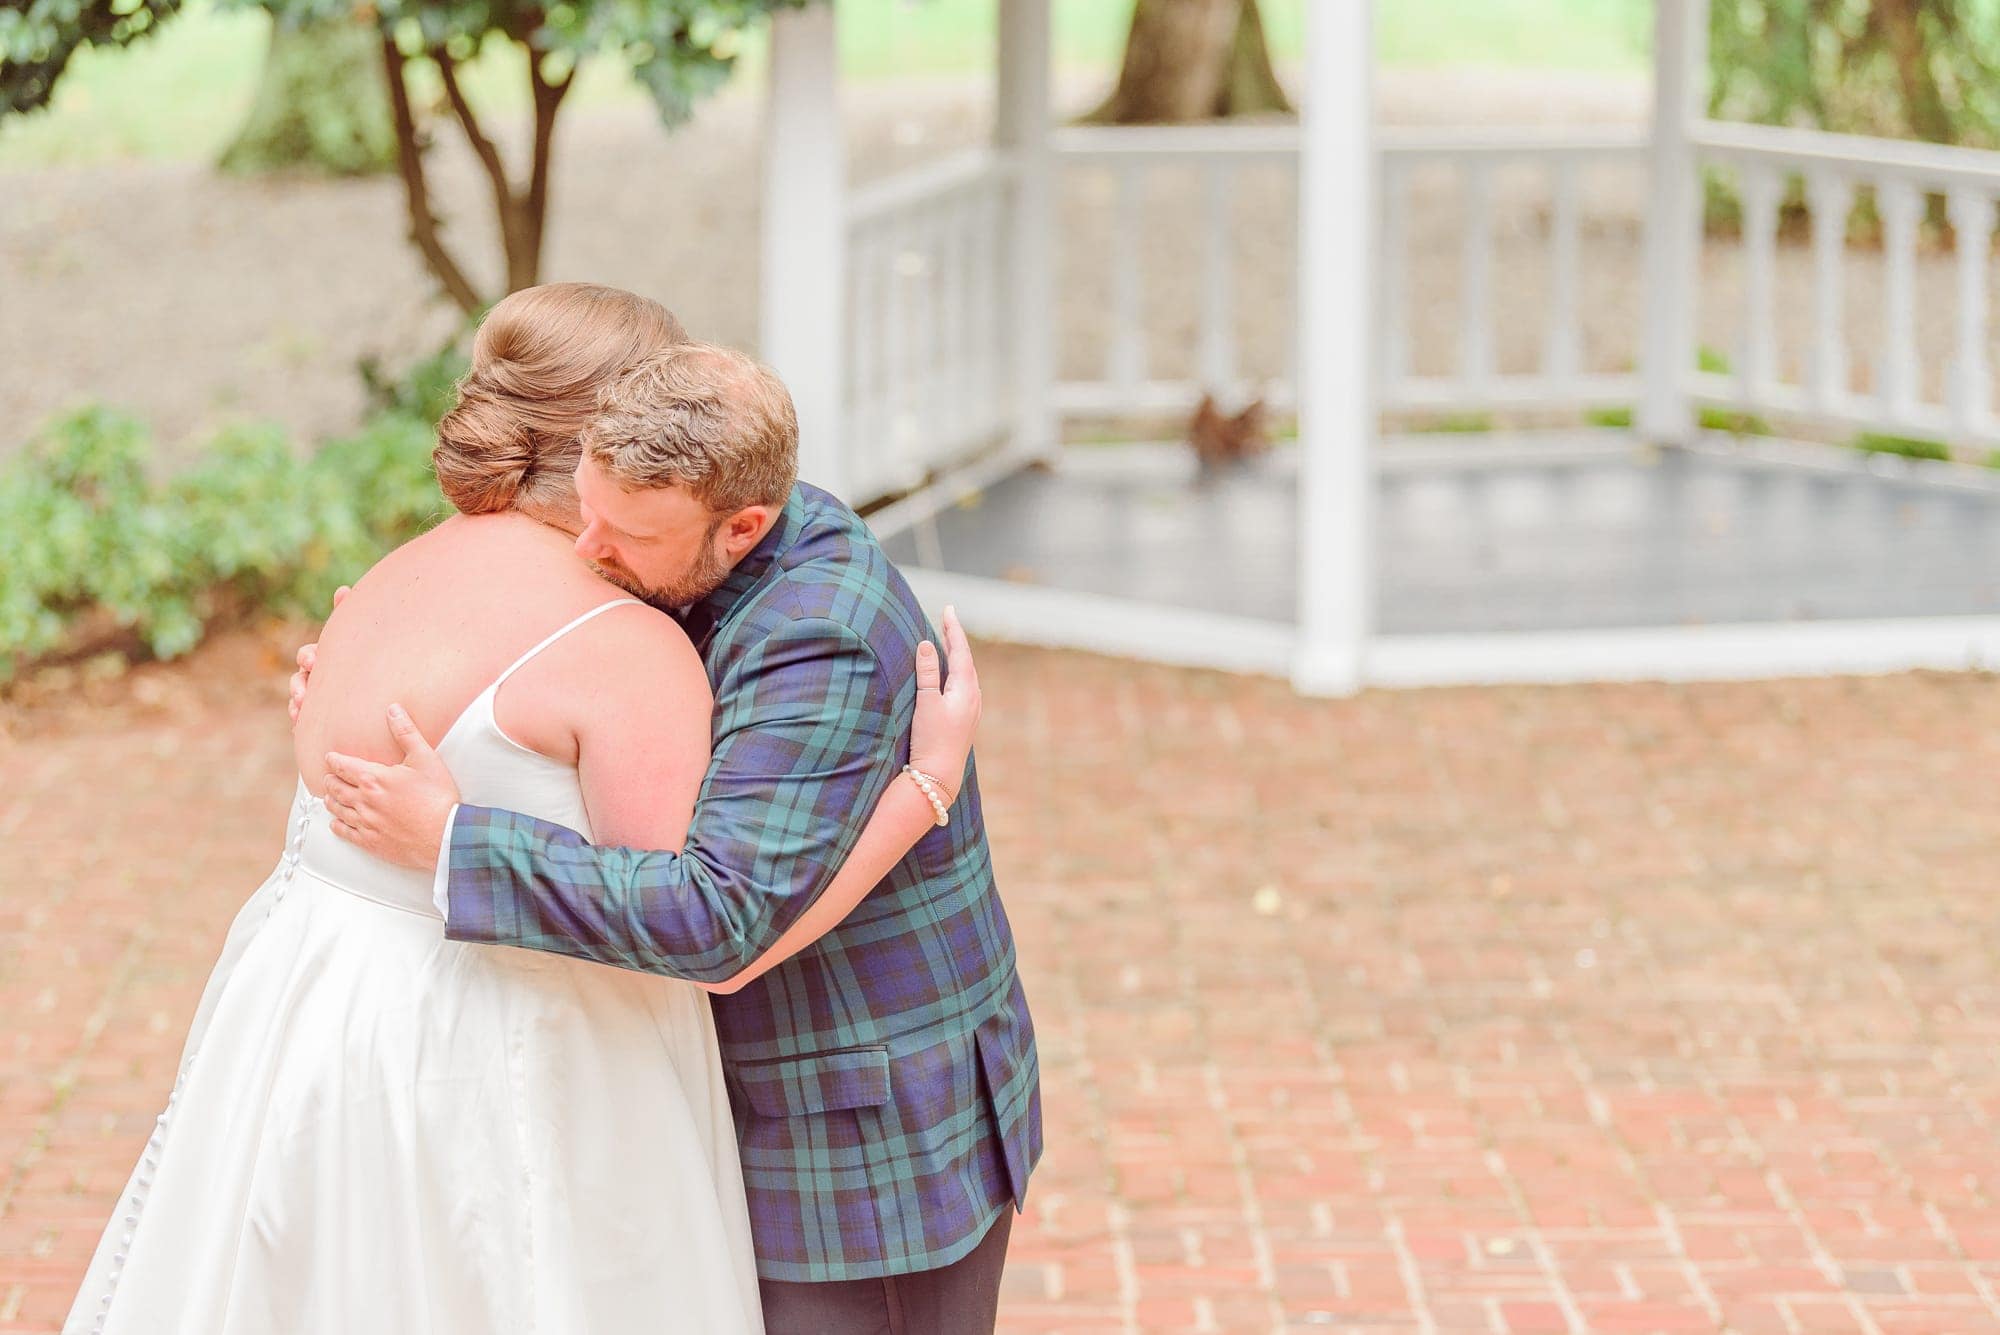 Sarah and Ryan share a hug under the gazebo at the Whitehead Manor during their first look.